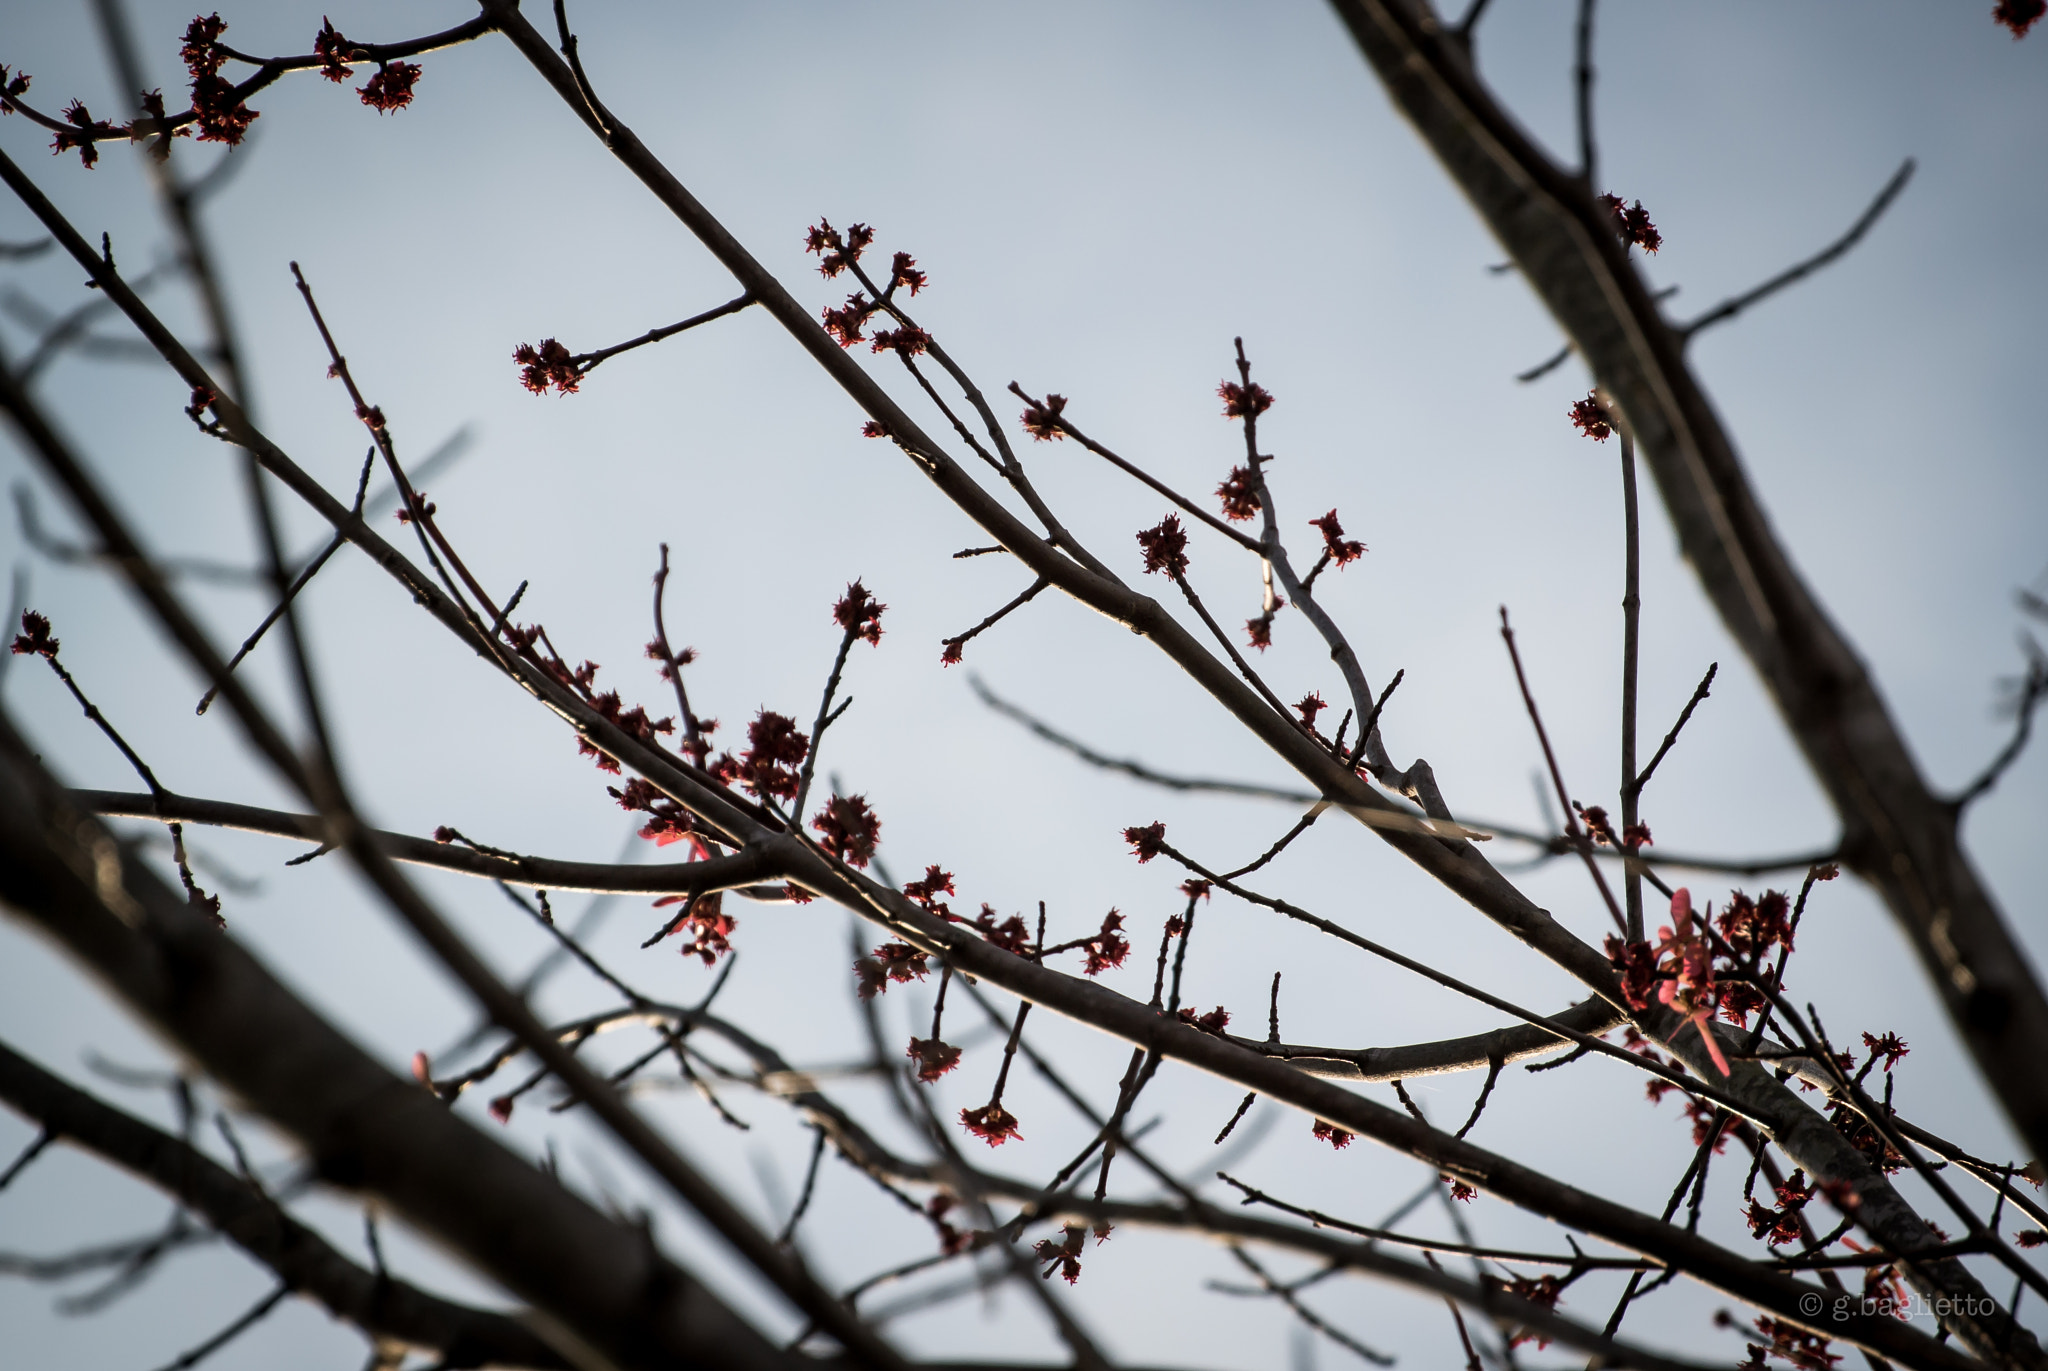 Nikon 1 J1 sample photo. The hope for spring photography